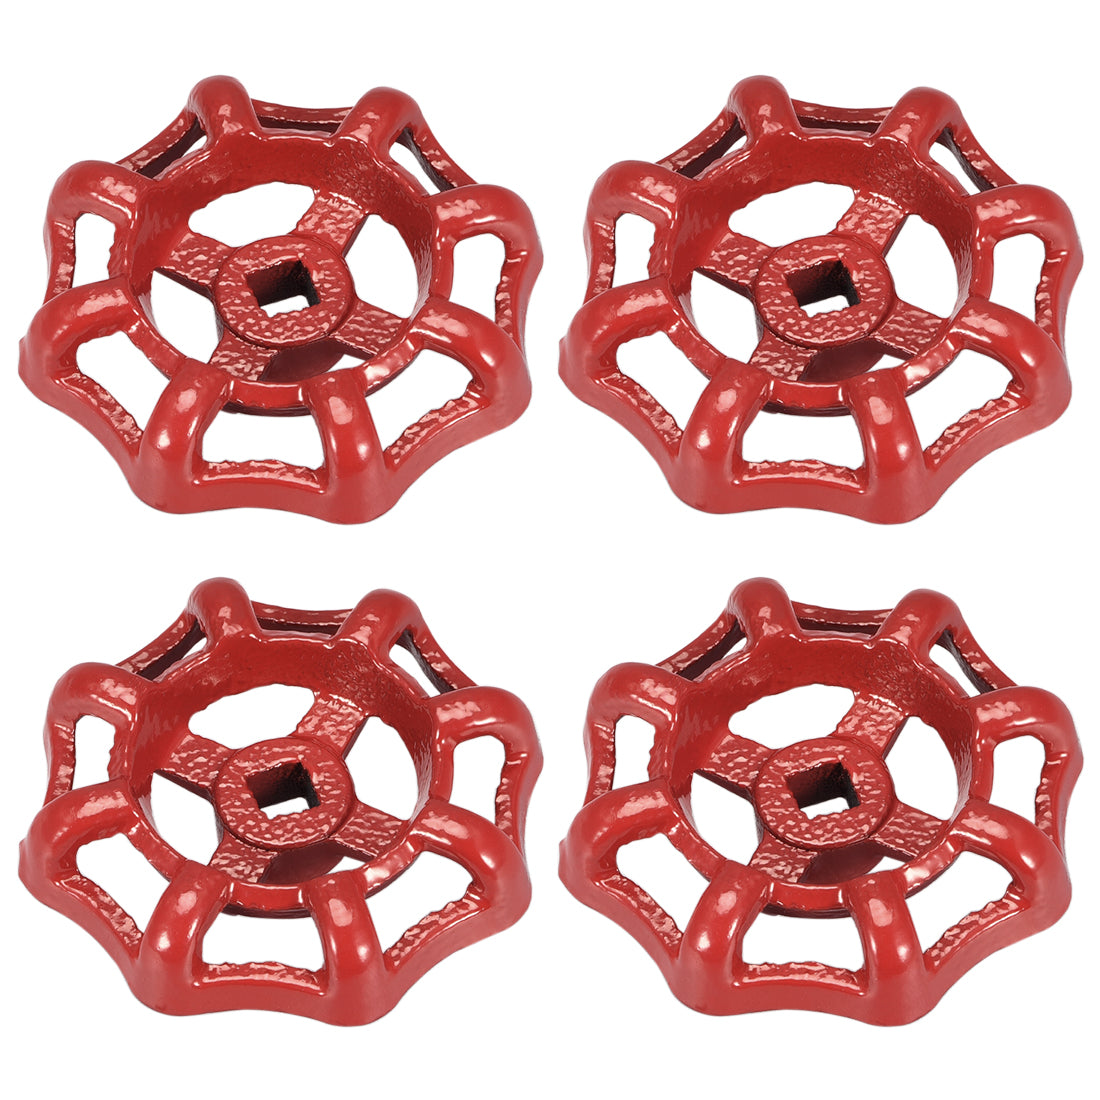 Uxcell Uxcell Round Wheel Handle, Square Broach 7x7mm, Wheel OD 63mm Paint Cast Steel Red 4Pcs